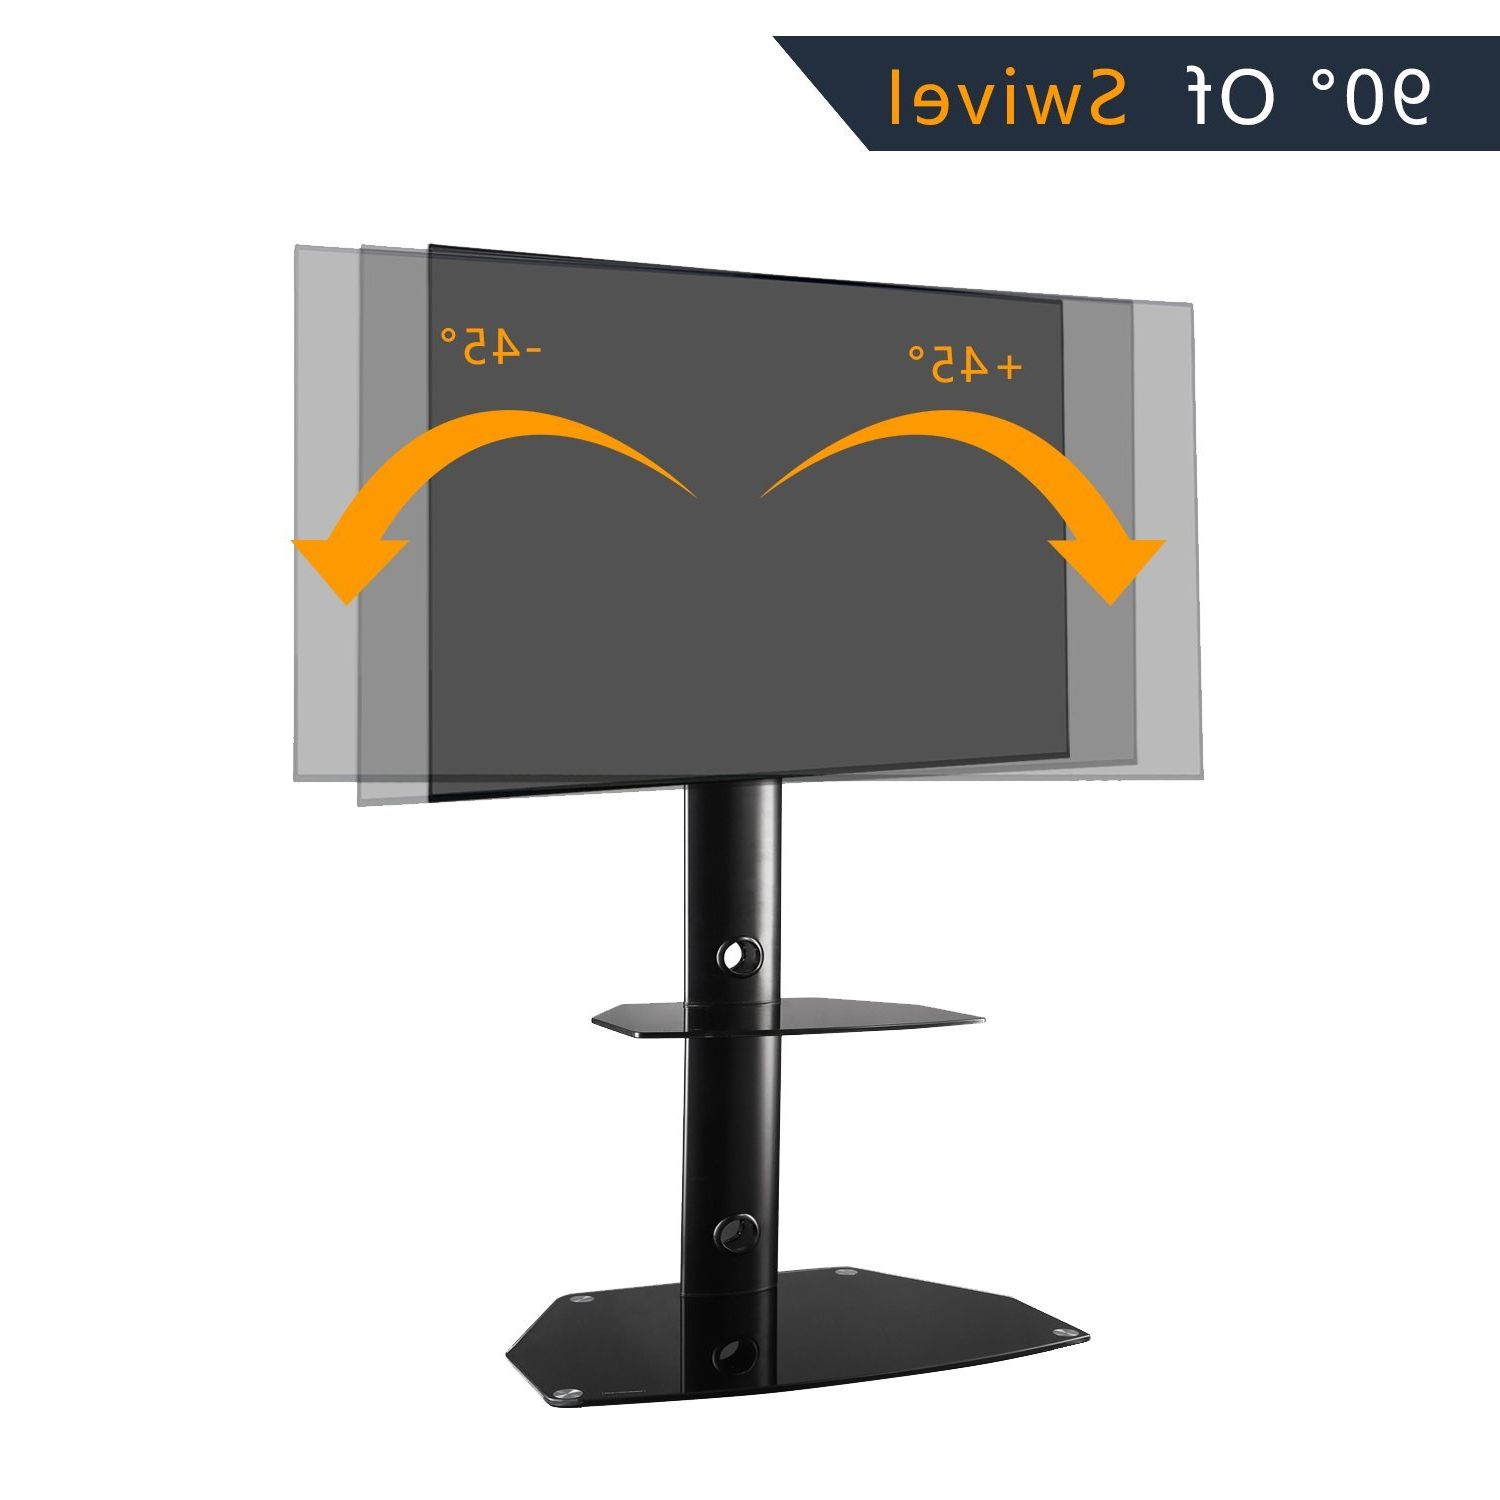 Famous Floor Tv Stands With Swivel Mount And Tempered Glass Shelves For Storage Inside Rfiver Tavr Furniture Modern Black Swivel Mount Floor Tv (Photo 7 of 10)